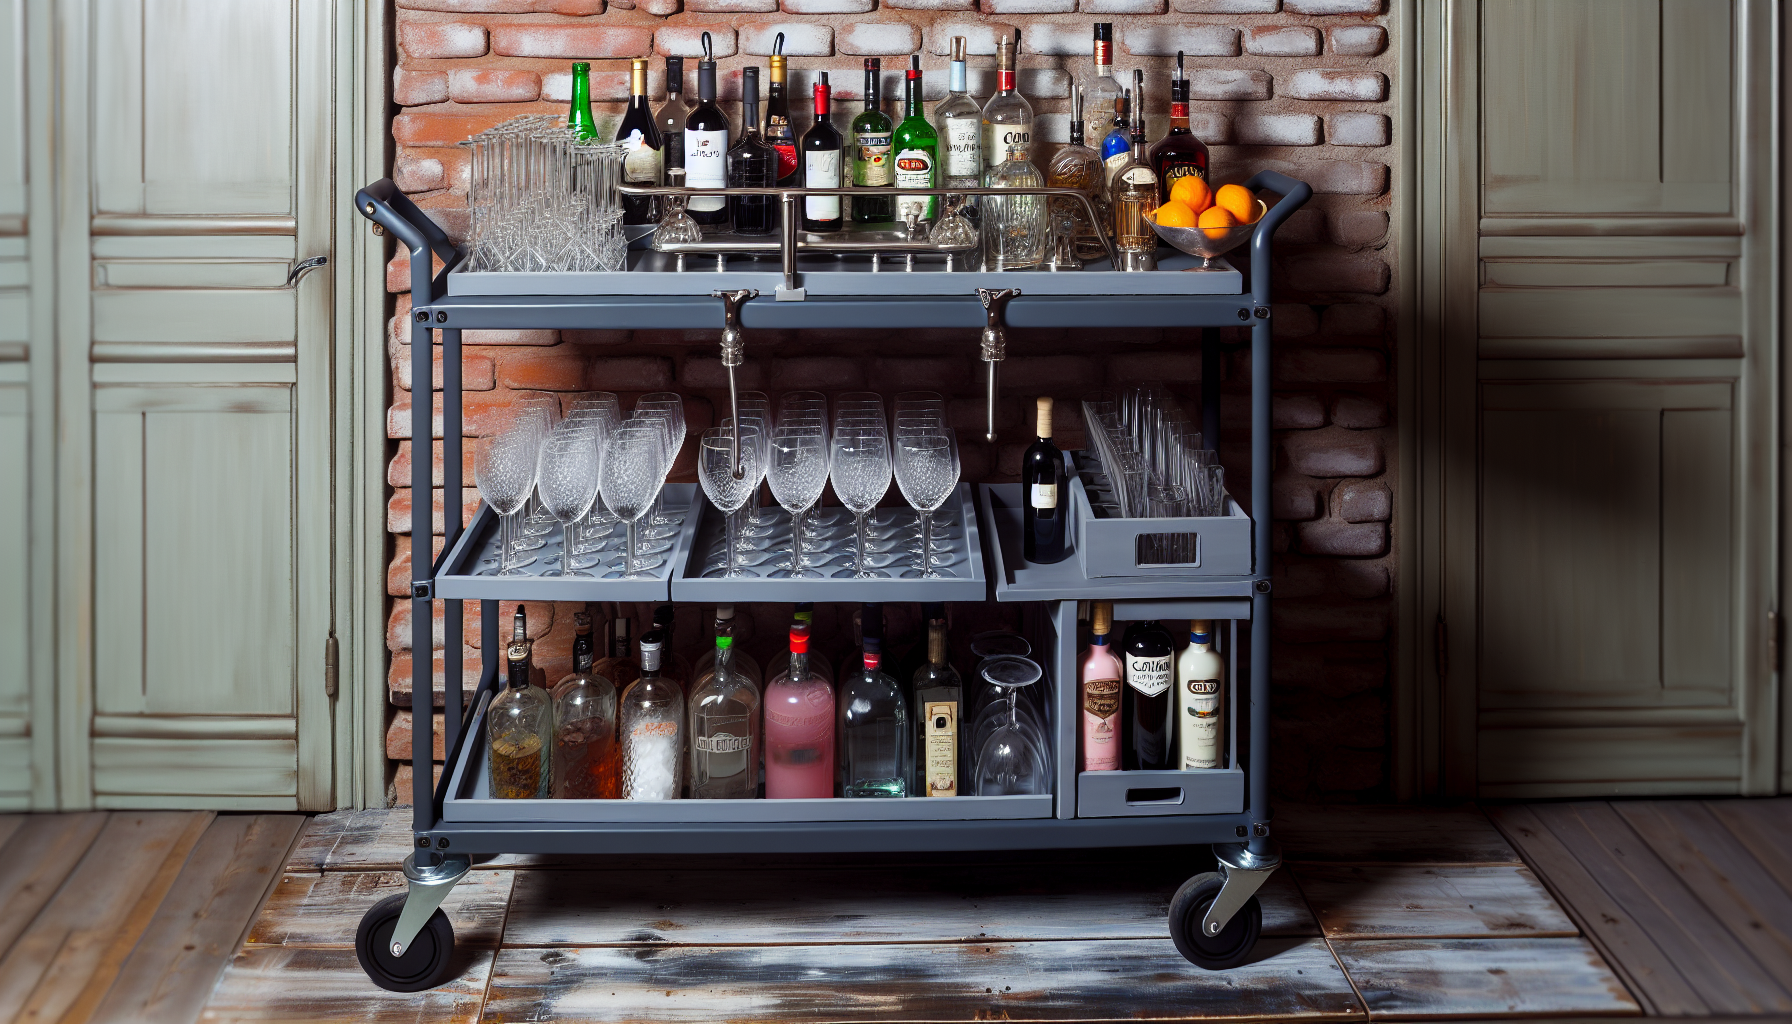 Stylish rolling home bar created from a utility cart